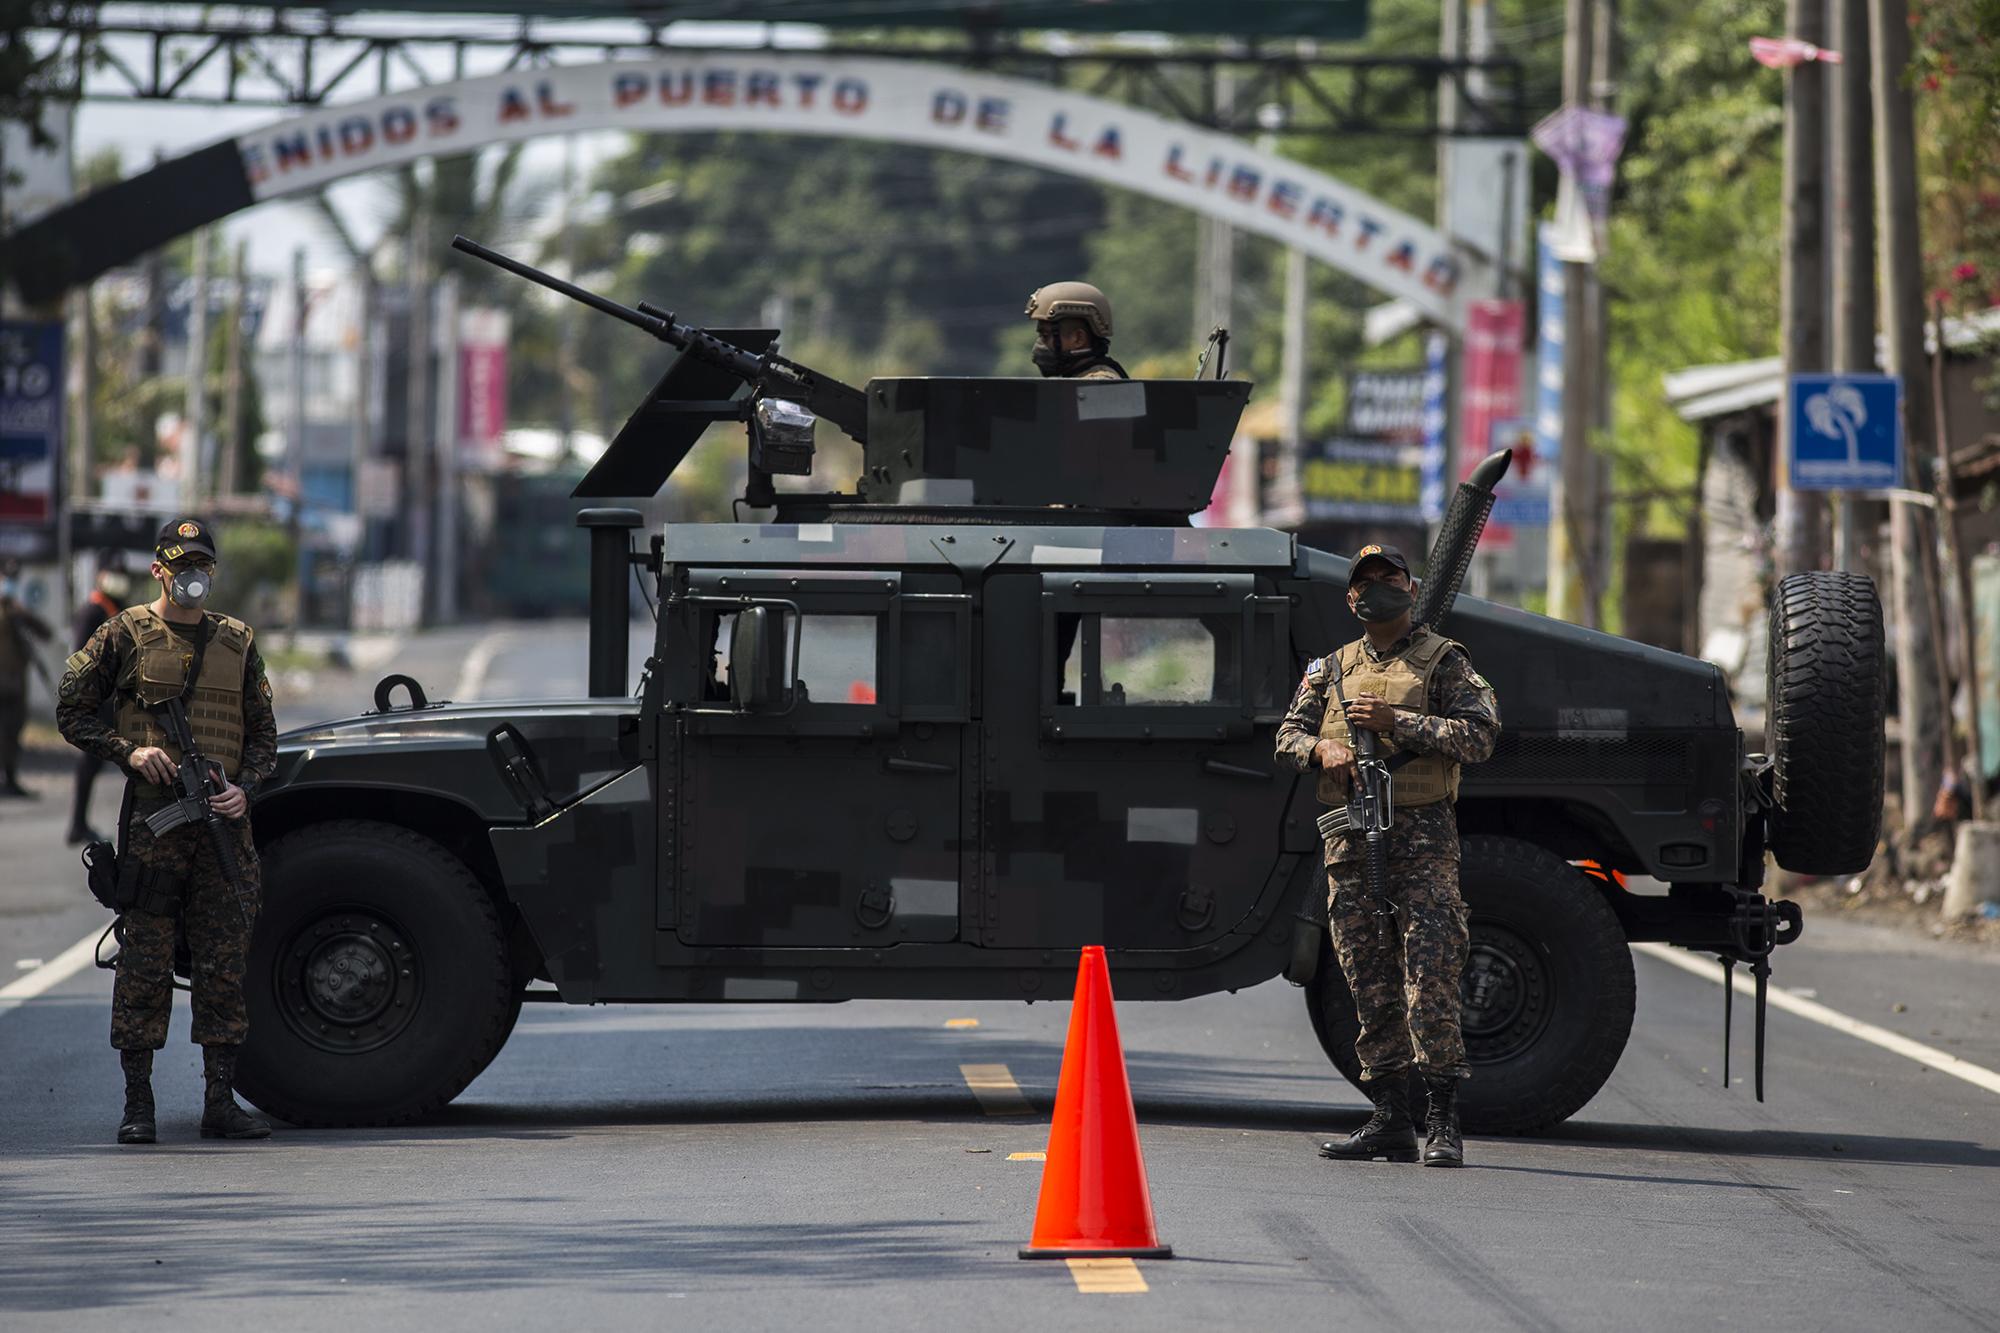 On Apr. 17, 2020 the Salvadoran military imposed a military blockade to curb traffic through Puerto de La Libertad and enforce the government